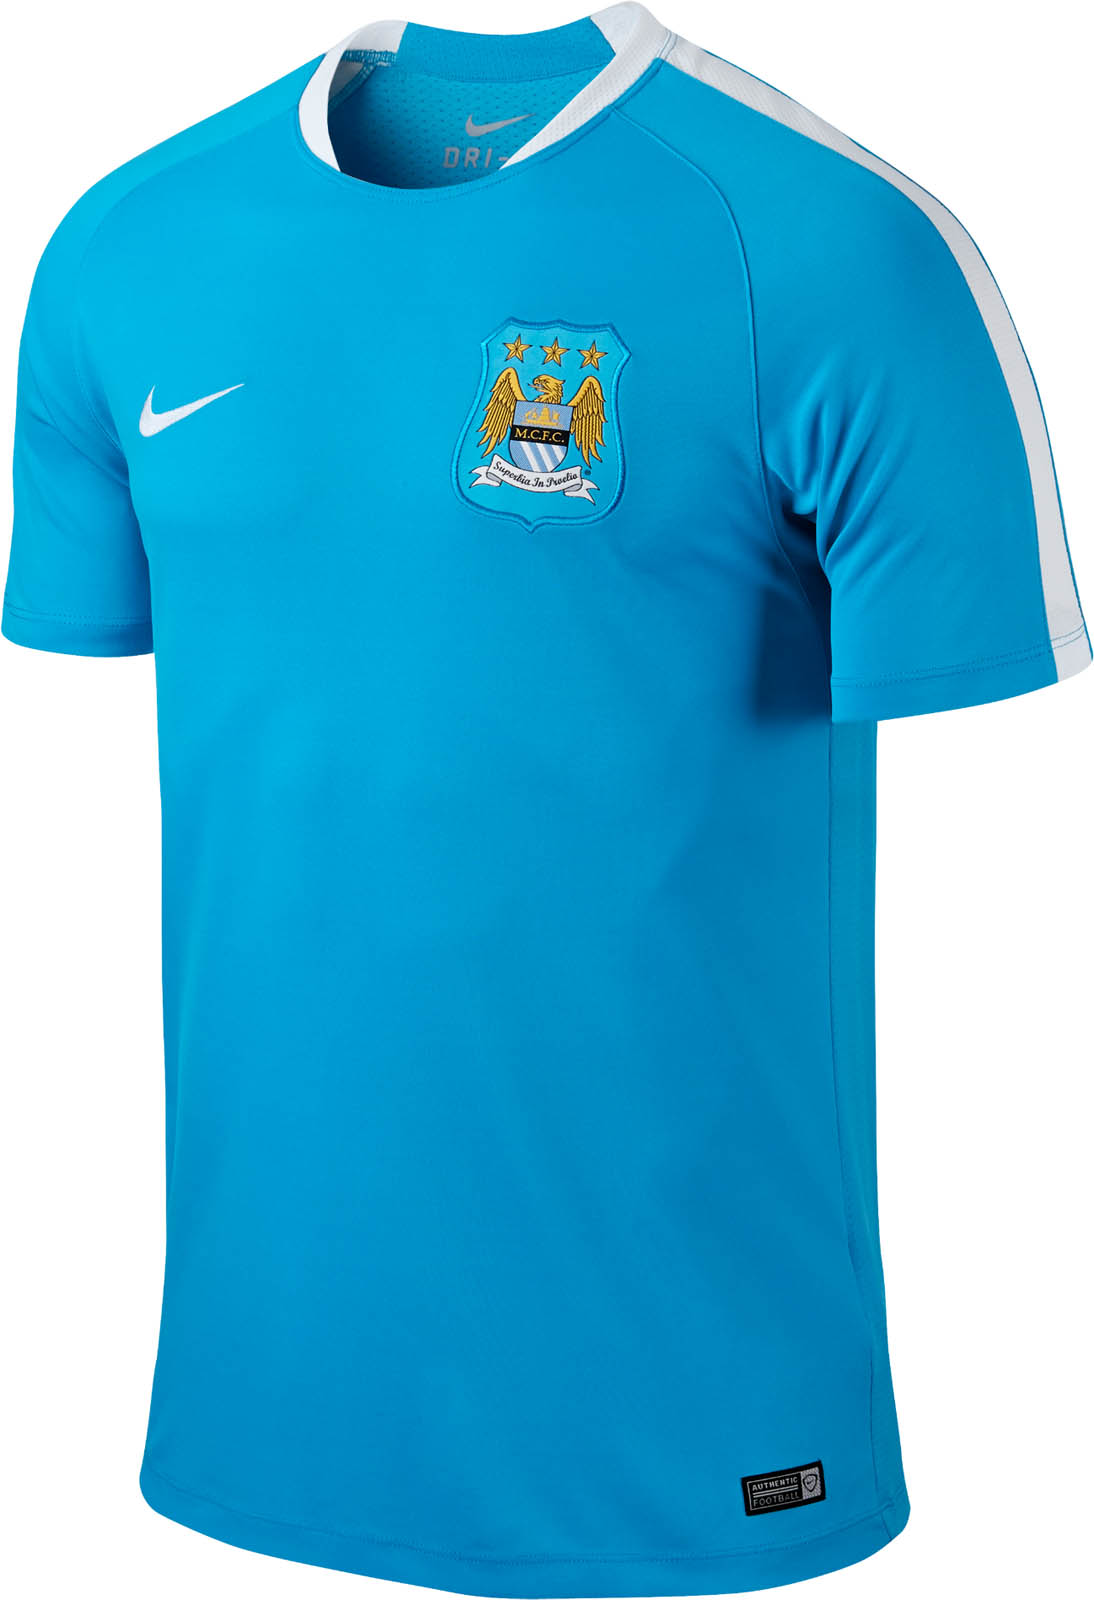 Manchester 15-16 Pre-Match and Training Shirts Released - Footy Headlines